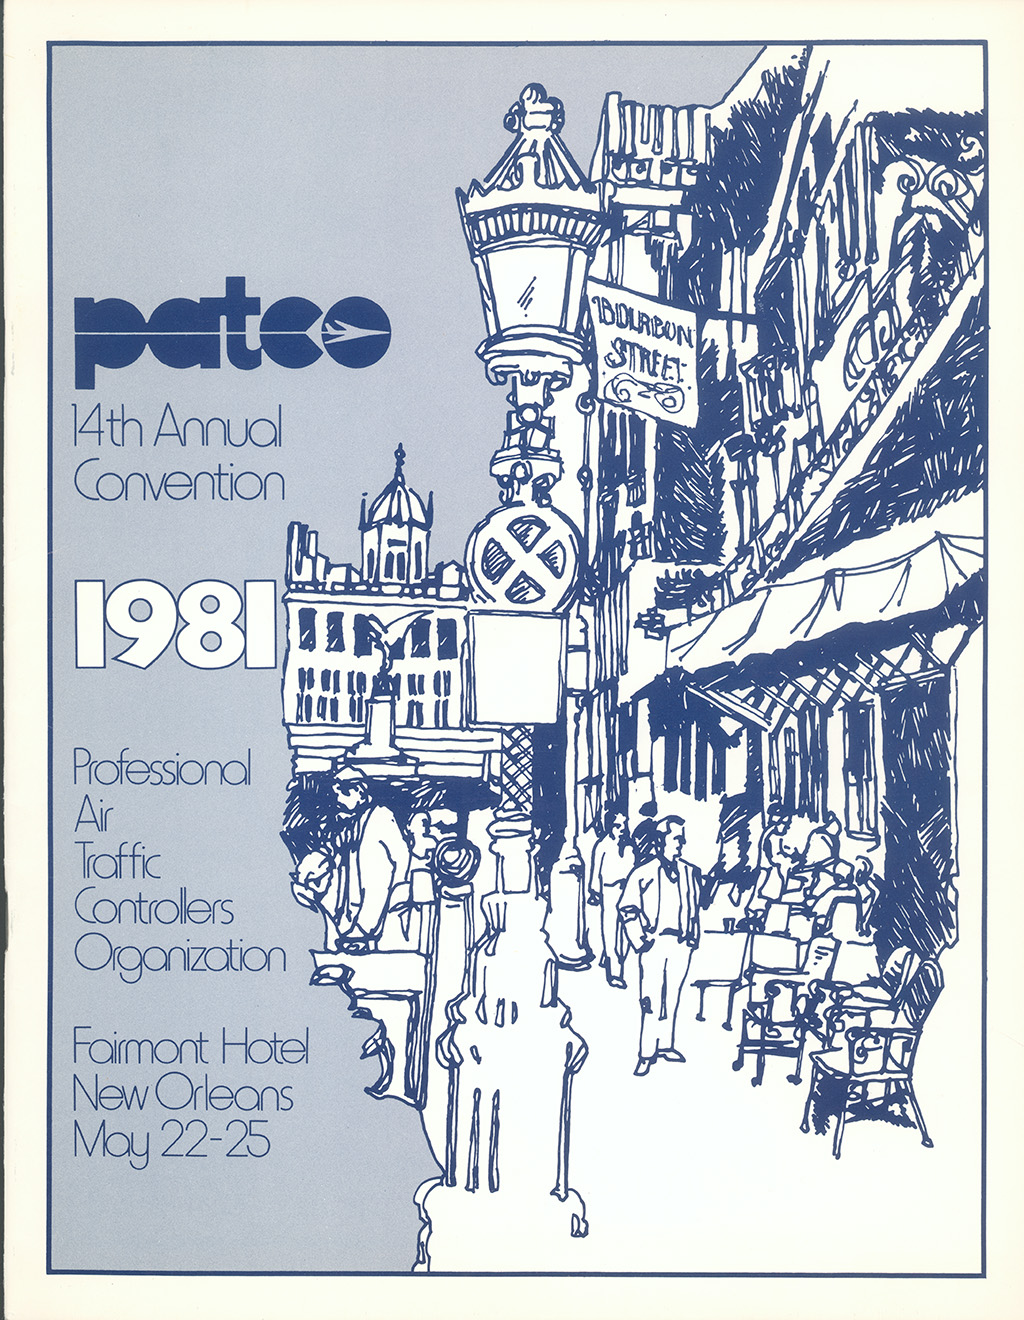 Cover of program with a drawing of Bourbon Street in New Orleans. The text of the program reads: "PATCO 14th Annual Convention, 1981, Professional Air Traffic Controllers Organization, Fairmont Hotel, New Orleans, May 22-25."